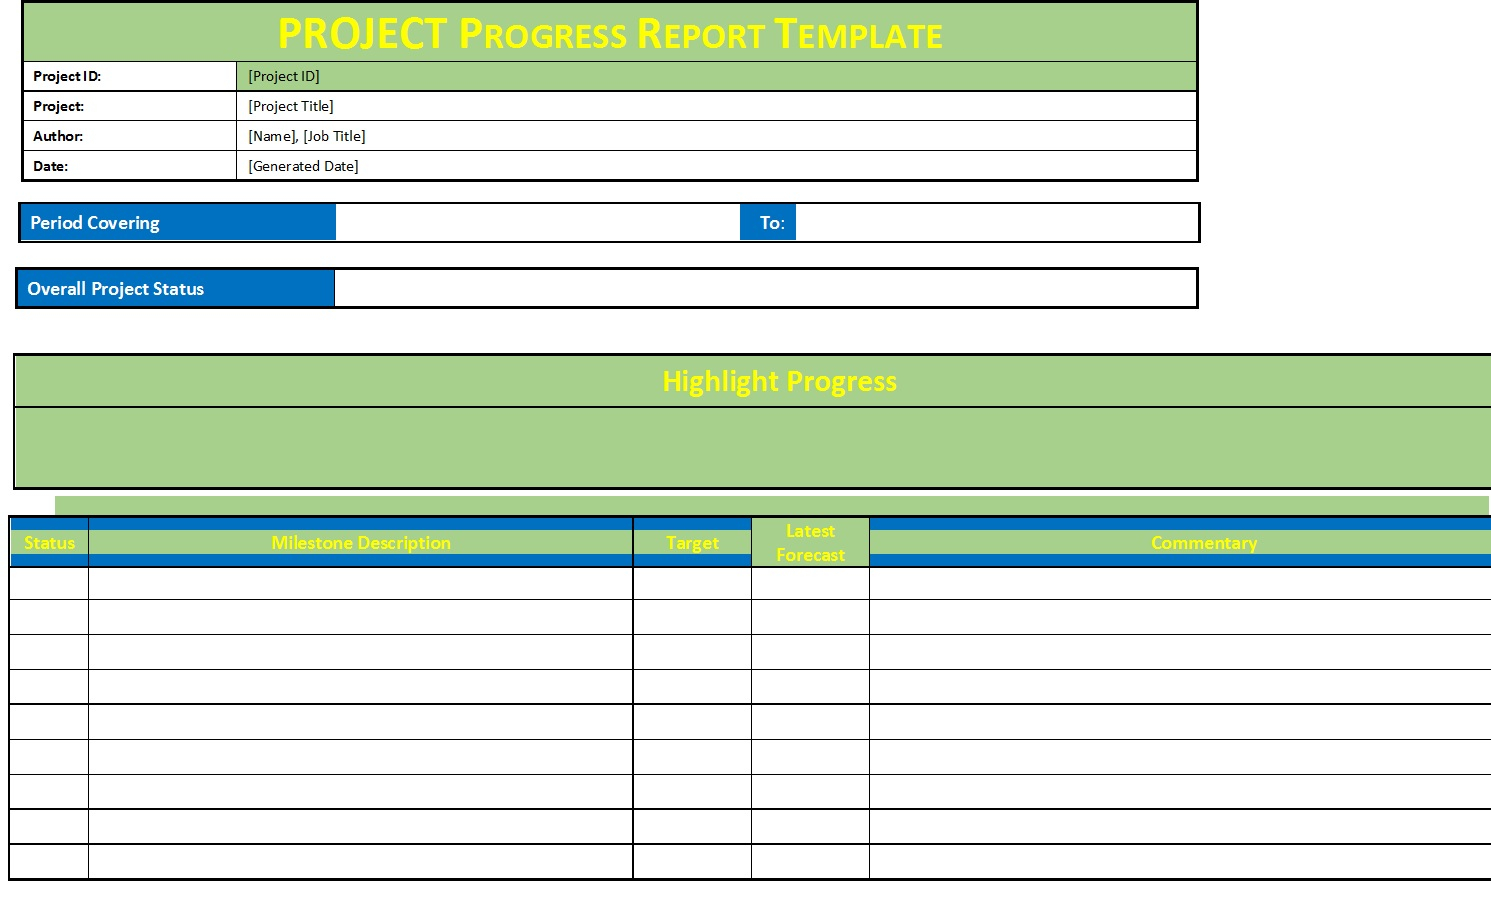 Project Progress Report Template (PPR) – Free Report Templates Regarding Progress Report Template For Construction Project